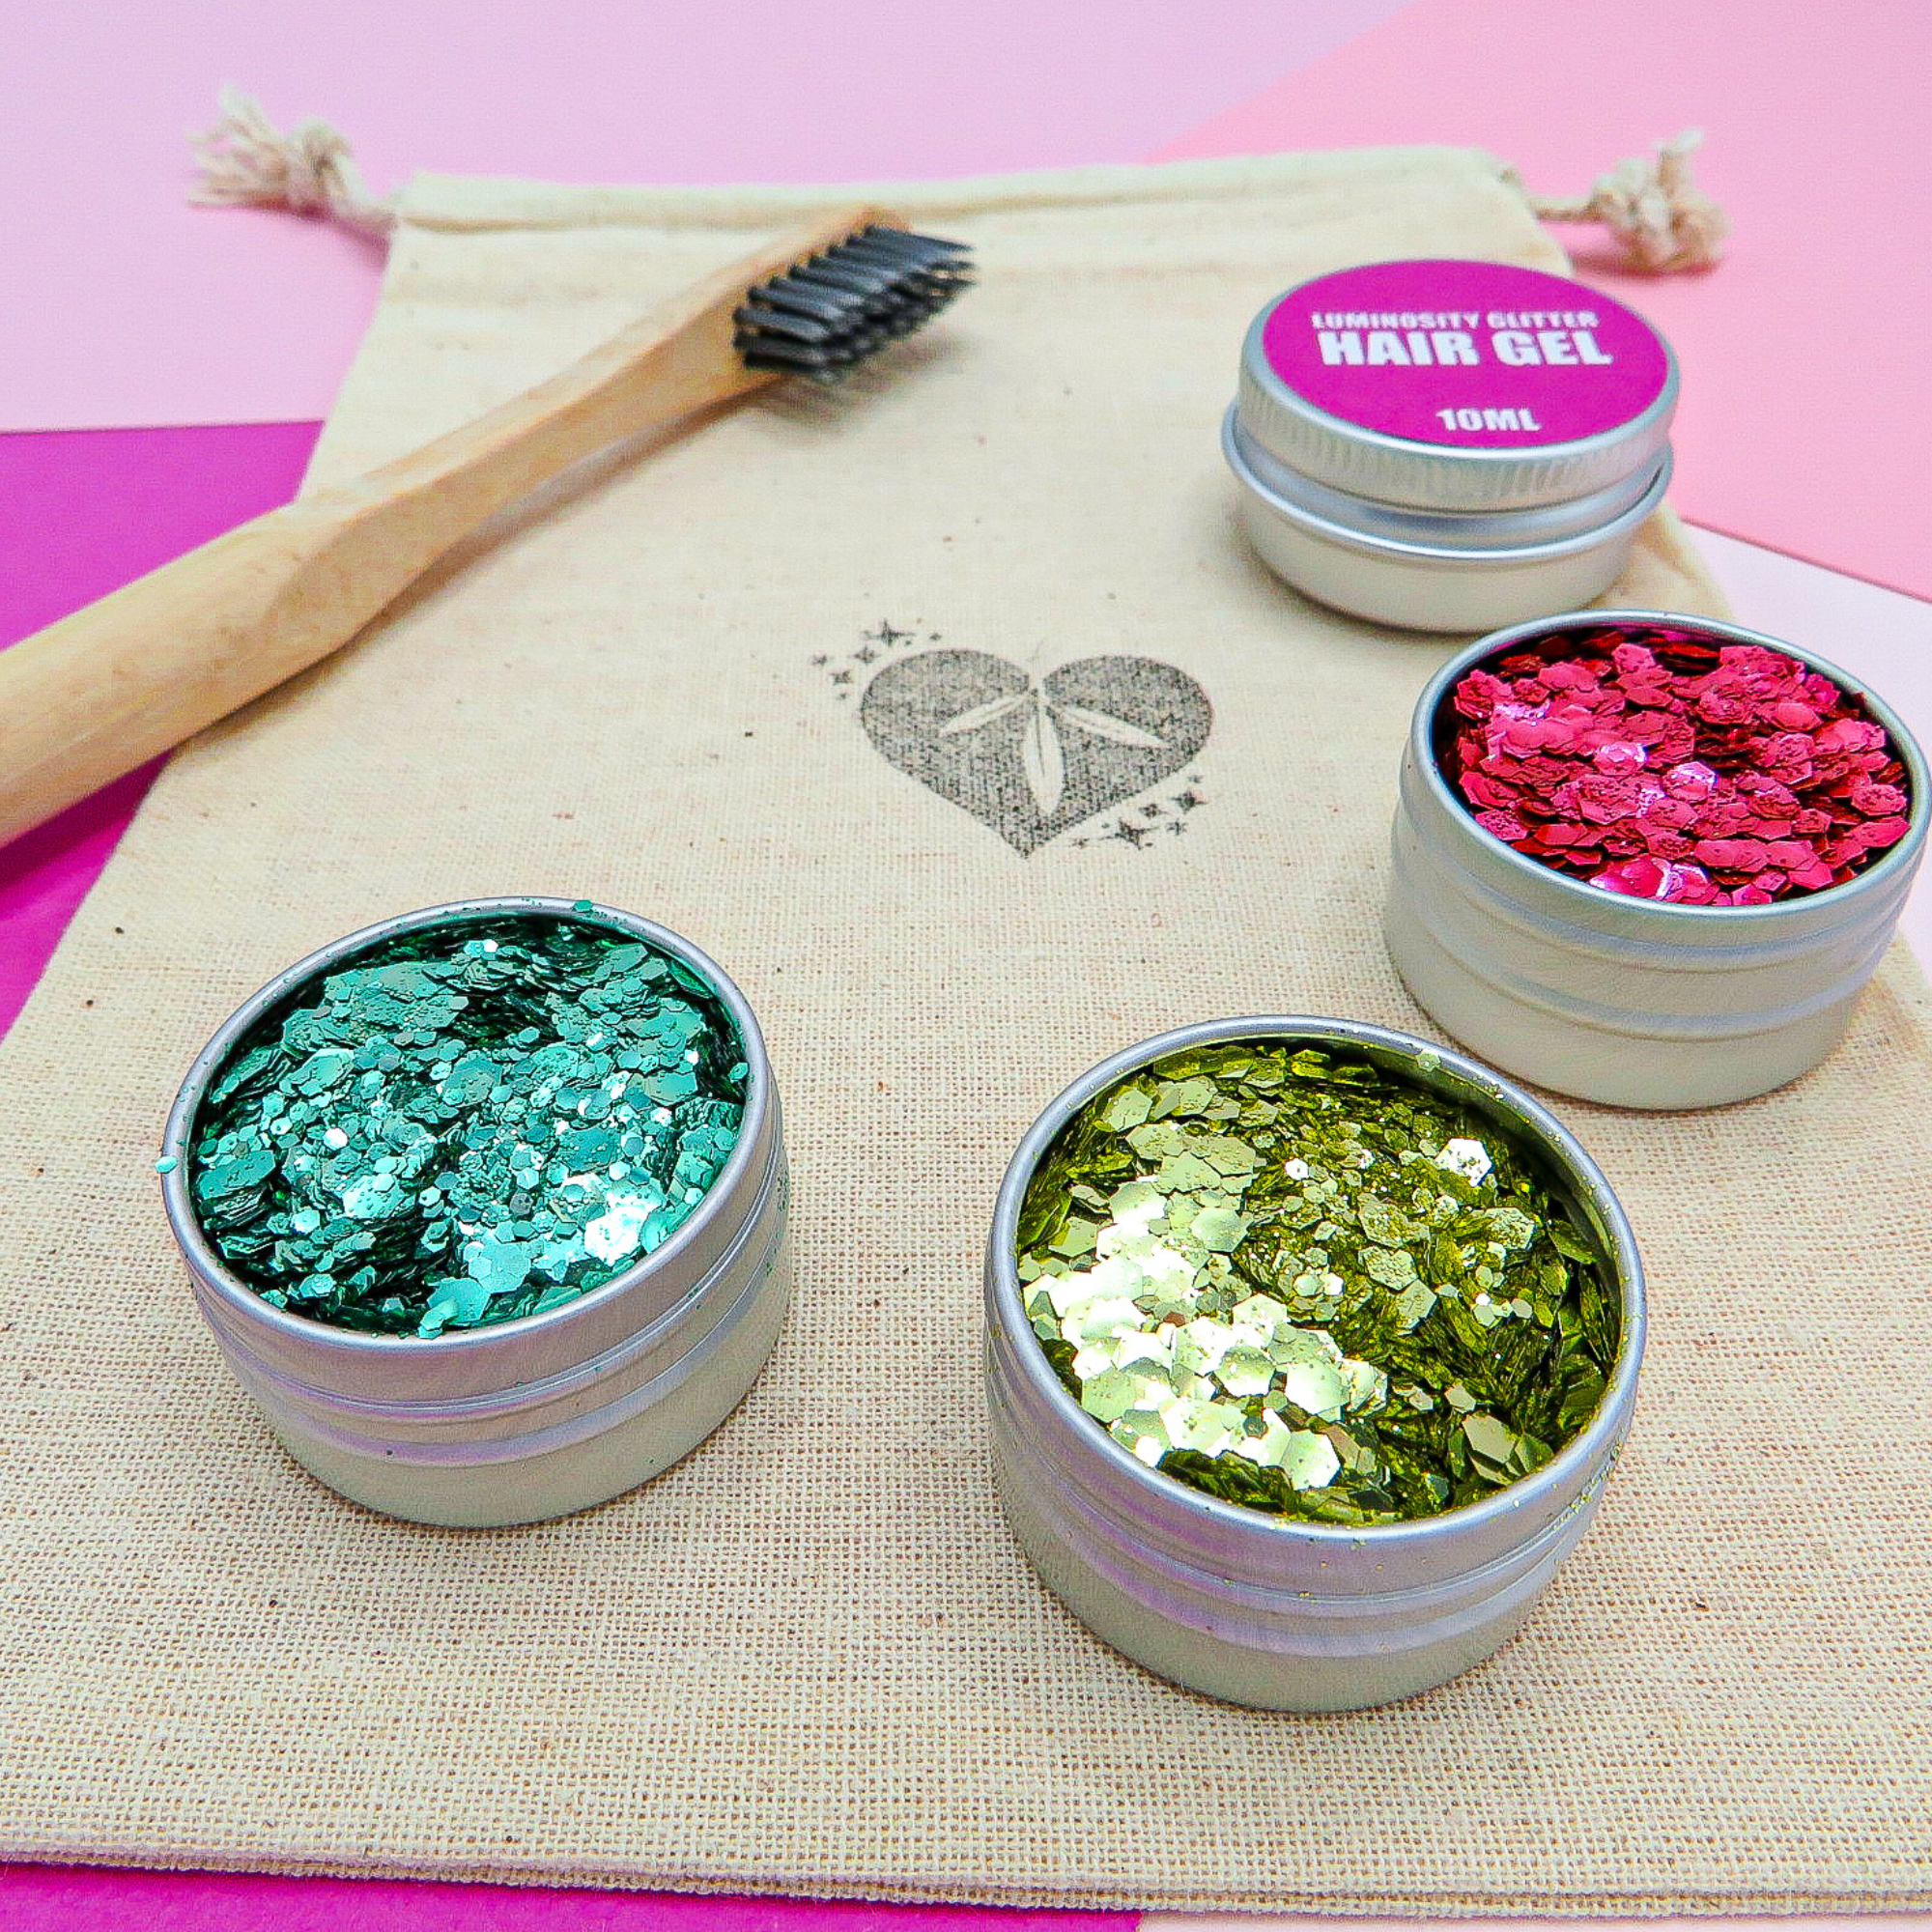 Christmas eco glitter beard set by Luminosity Glitter includes pots of red, gold and green glitter, a bamboo application brush and pot of vegan hair gel.